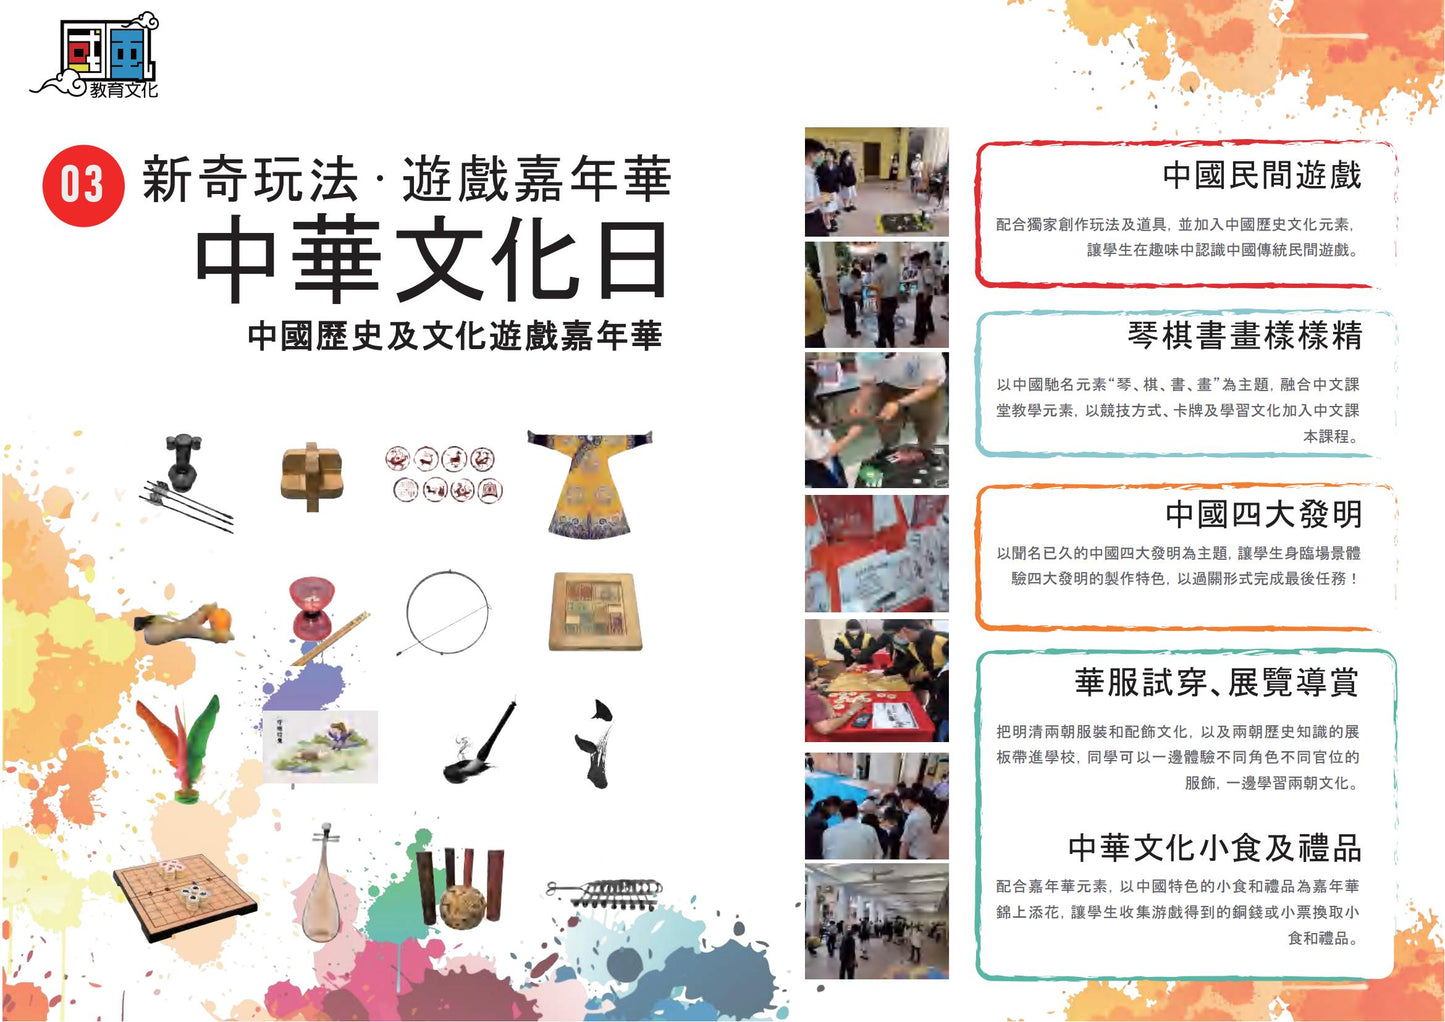 Chinese Culture Day - Chinese History and Culture Game Carnival